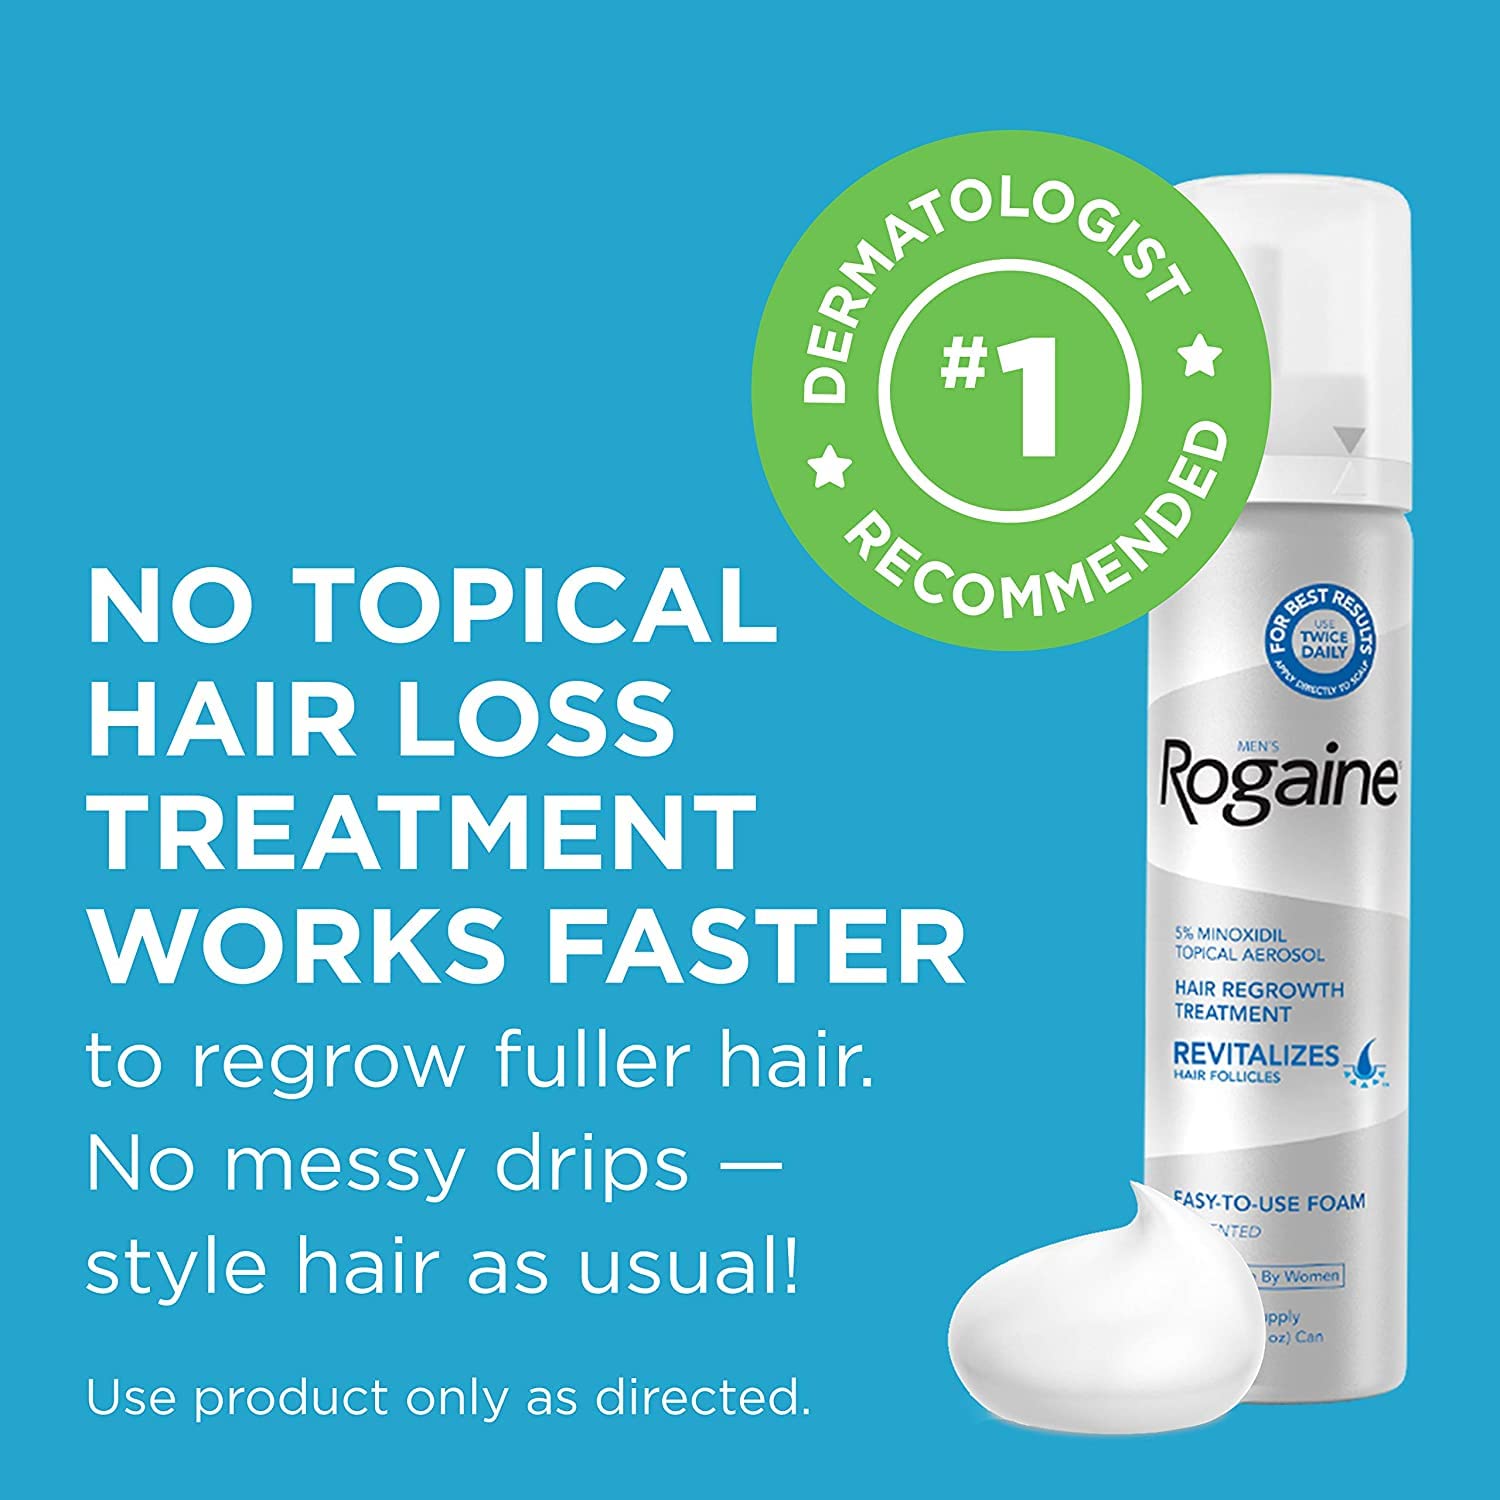 Rogaine for Men Hair Regrowth Treatment, Easy-to-Use Foam, 6 Month Supply (6 Packs- 2.11 oz Cans)